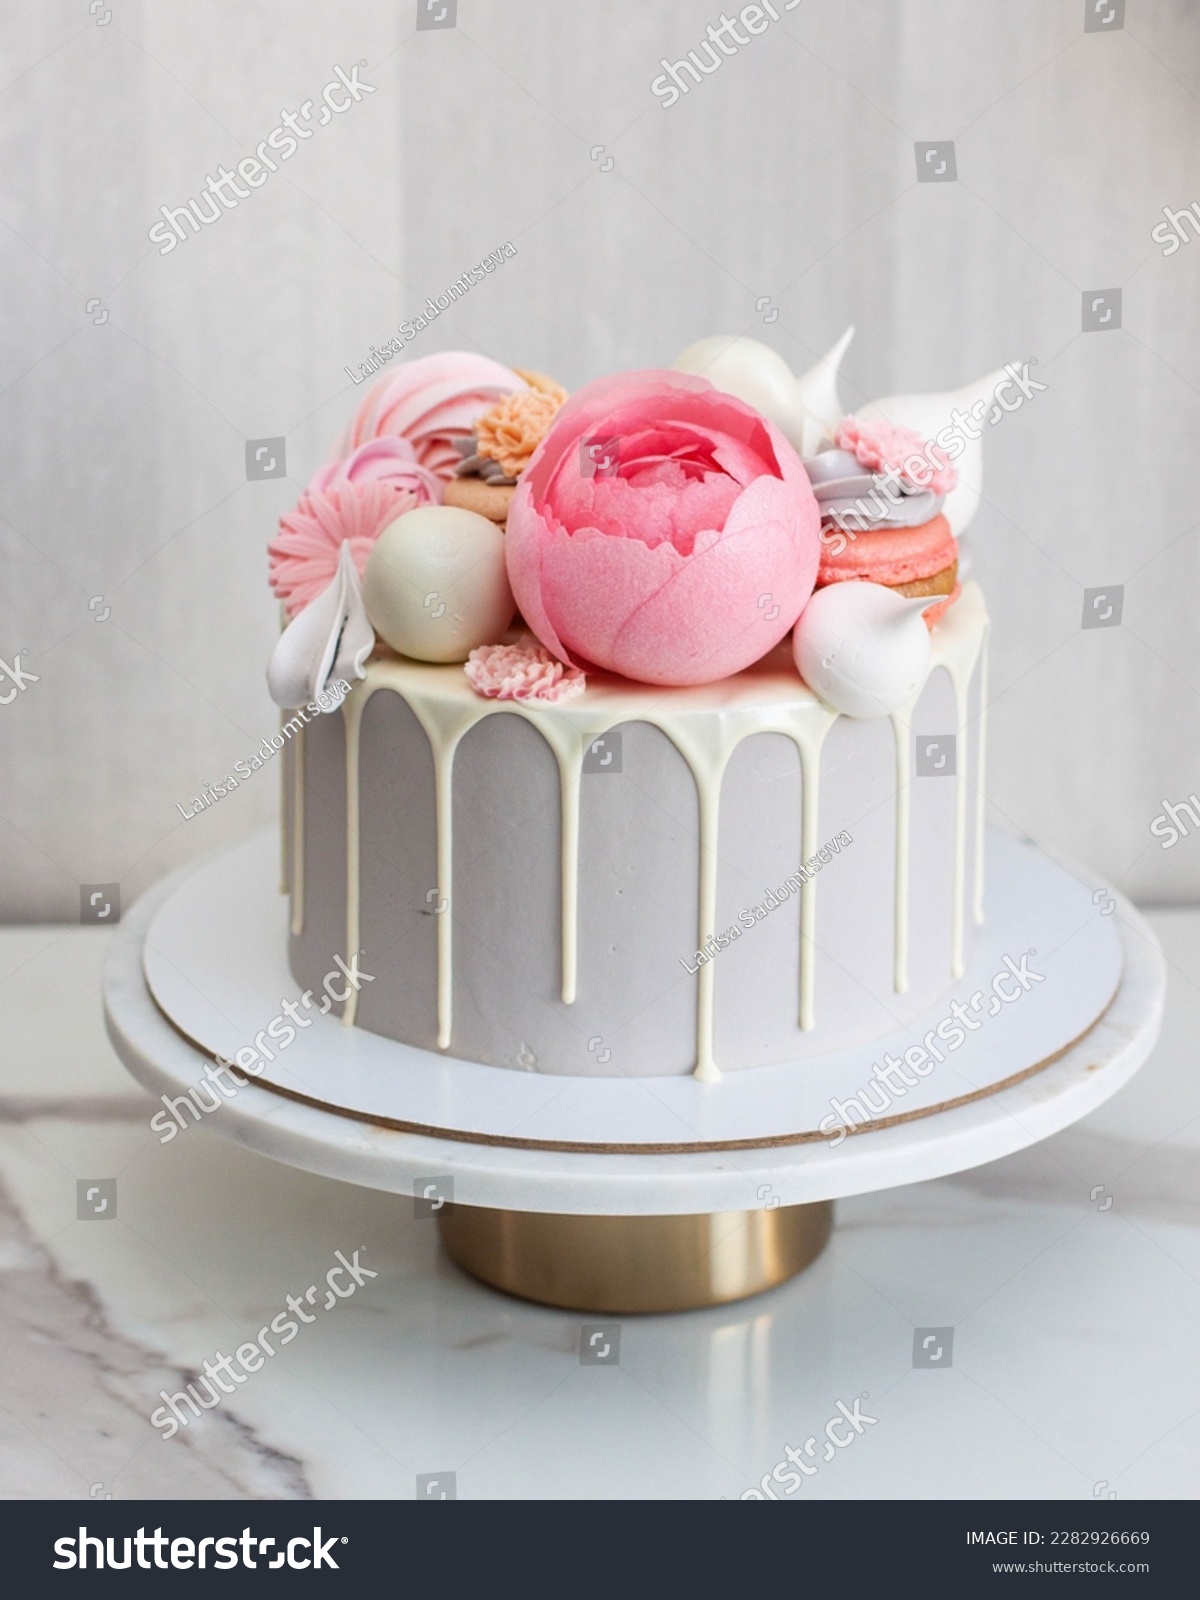 Beautiful and elegant grey cake decorated with melted white chocolate, macaroons, pink peony flower, cake pops and candies on marble cakestand #2282926669